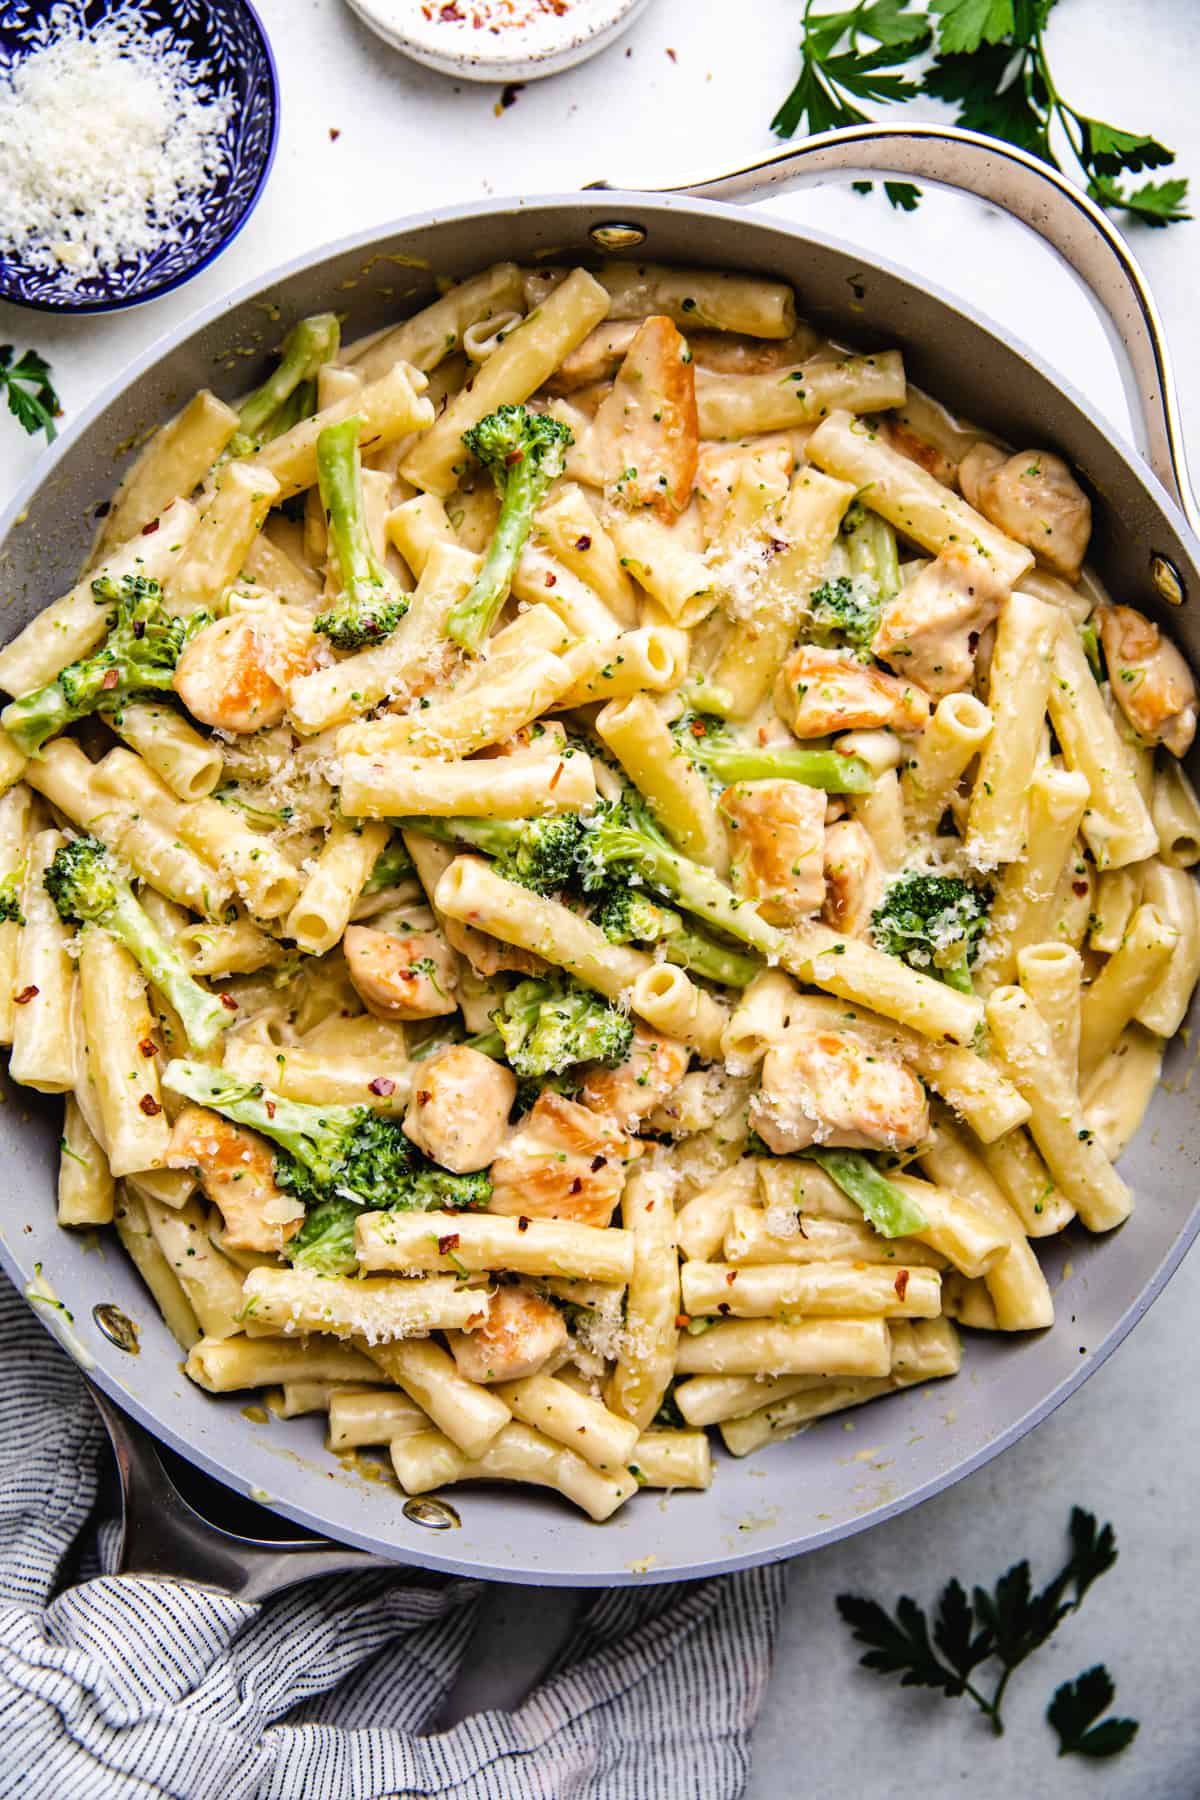 Pasta, diced chicken, and broccolli in creamy sauce in a skillet.